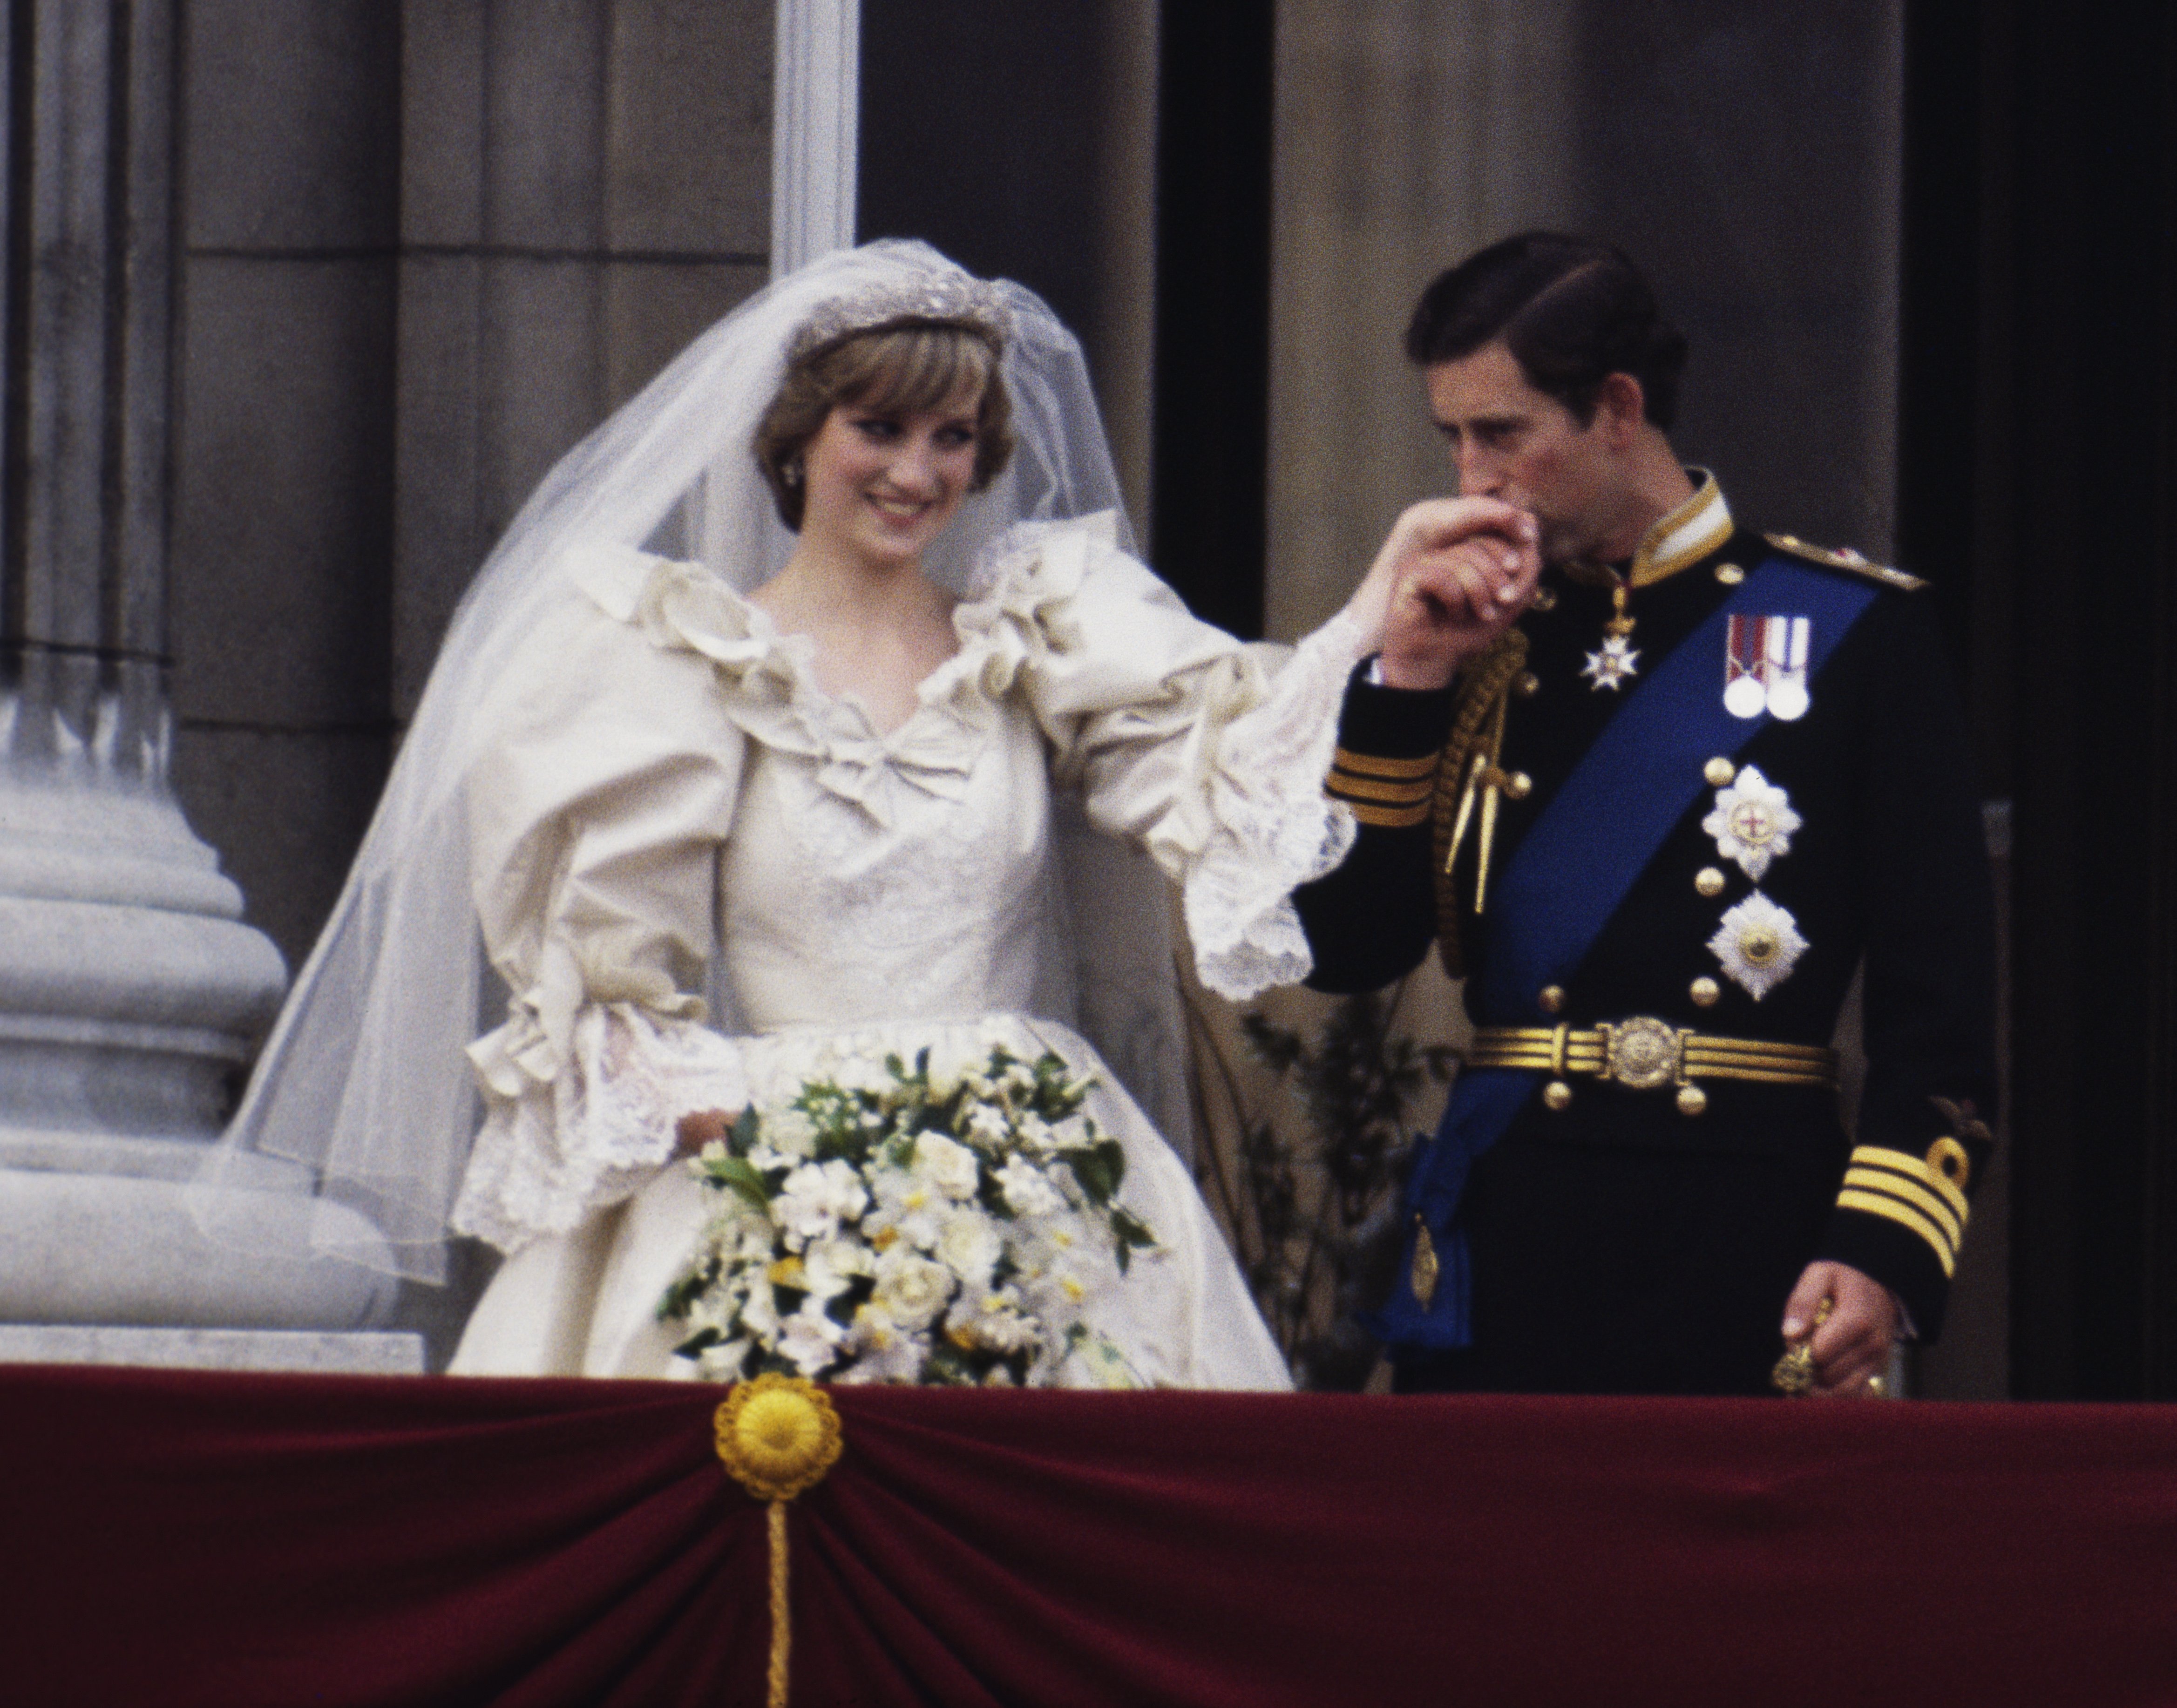 Diana, Princess of Wales, with her newly-wedded husband, Charles, the Prince of Wales, on the balcony of Buckingham Palace on their wedding day on July 29, 1981. / Source: Getty Images